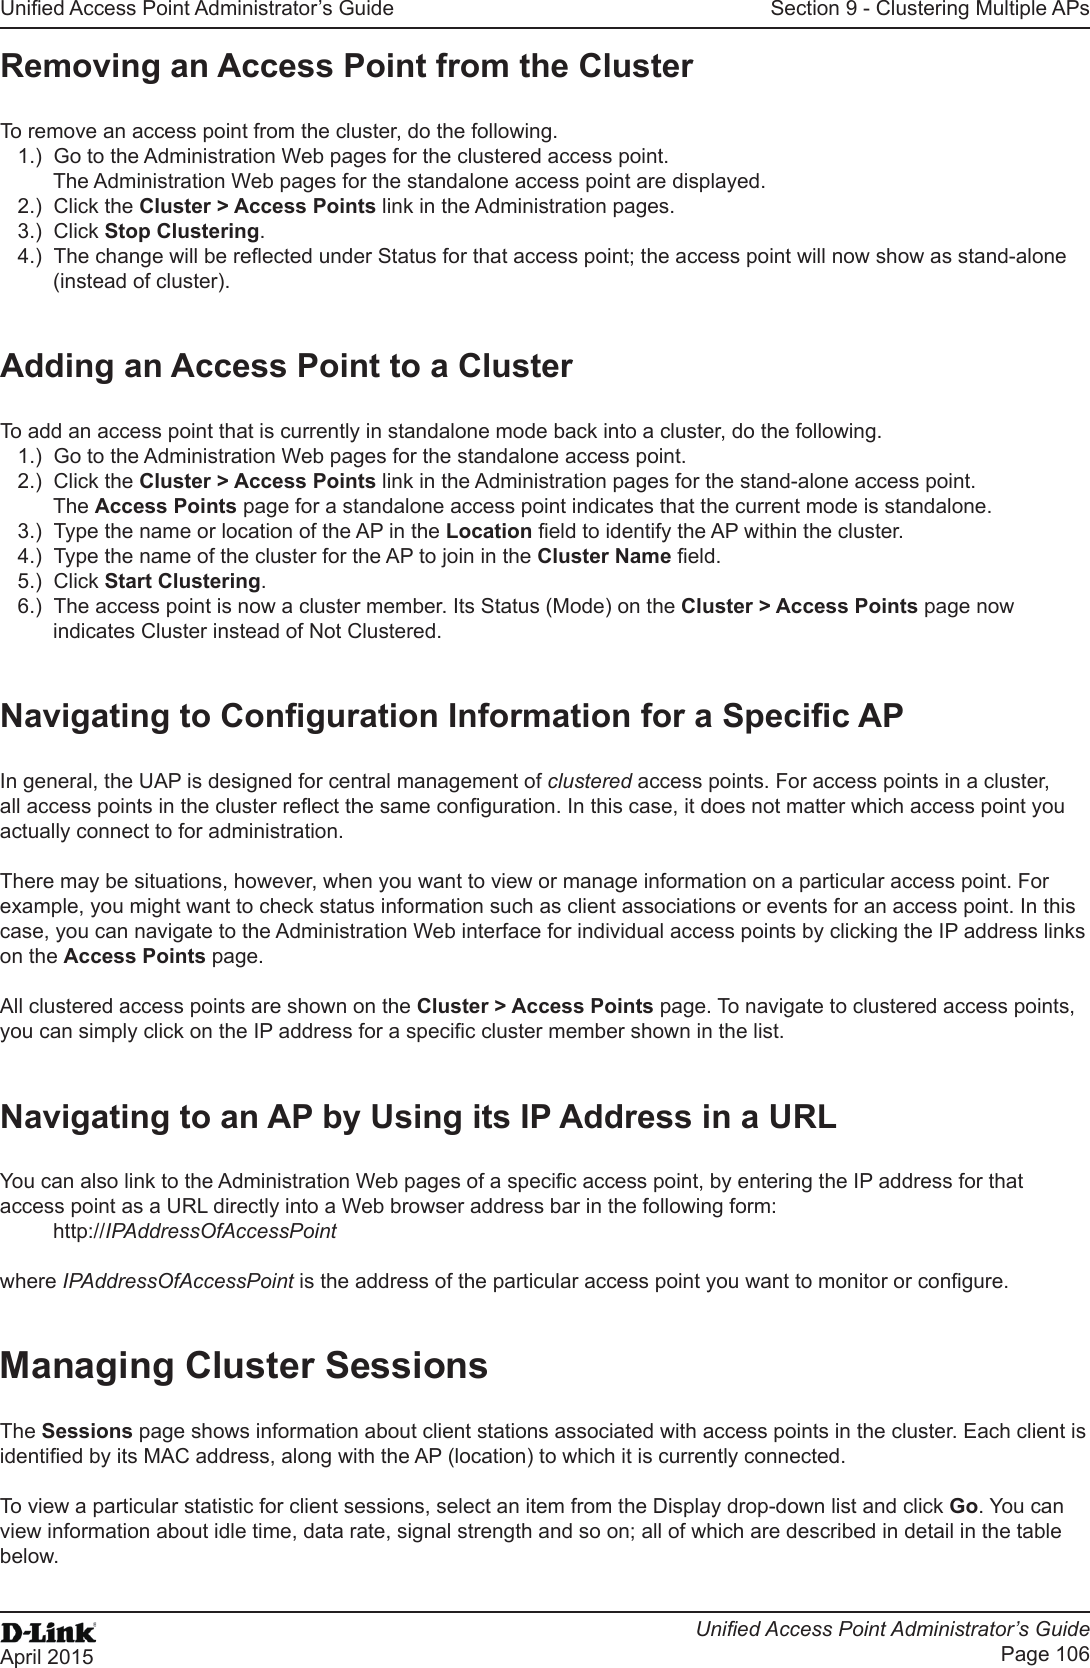 Unied Access Point Administrator’s GuideUnied Access Point Administrator’s GuidePage 106April 2015Section 9 - Clustering Multiple APsRemoving an Access Point from the ClusterTo remove an access point from the cluster, do the following.1.)  Go to the Administration Web pages for the clustered access point. The Administration Web pages for the standalone access point are displayed.2.)  Click the Cluster &gt; Access Points link in the Administration pages.3.)  Click Stop Clustering.4.)  The change will be reected under Status for that access point; the access point will now show as stand-alone (instead of cluster).Adding an Access Point to a ClusterTo add an access point that is currently in standalone mode back into a cluster, do the following.1.)  Go to the Administration Web pages for the standalone access point.2.)  Click the Cluster &gt; Access Points link in the Administration pages for the stand-alone access point.The Access Points page for a standalone access point indicates that the current mode is standalone.3.)  Type the name or location of the AP in the Location eld to identify the AP within the cluster.4.)  Type the name of the cluster for the AP to join in the Cluster Name eld.5.)  Click Start Clustering.6.)  The access point is now a cluster member. Its Status (Mode) on the Cluster &gt; Access Points page now indicates Cluster instead of Not Clustered.Navigating to Conguration Information for a Specic APIn general, the UAP is designed for central management of clustered access points. For access points in a cluster, all access points in the cluster reect the same conguration. In this case, it does not matter which access point you actually connect to for administration.There may be situations, however, when you want to view or manage information on a particular access point. For example, you might want to check status information such as client associations or events for an access point. In this case, you can navigate to the Administration Web interface for individual access points by clicking the IP address links on the Access Points page.All clustered access points are shown on the Cluster &gt; Access Points page. To navigate to clustered access points, you can simply click on the IP address for a specic cluster member shown in the list.Navigating to an AP by Using its IP Address in a URLYou can also link to the Administration Web pages of a specic access point, by entering the IP address for that access point as a URL directly into a Web browser address bar in the following form:http://IPAddressOfAccessPointwhere IPAddressOfAccessPoint is the address of the particular access point you want to monitor or congure.Managing Cluster SessionsThe Sessions page shows information about client stations associated with access points in the cluster. Each client is identied by its MAC address, along with the AP (location) to which it is currently connected.To view a particular statistic for client sessions, select an item from the Display drop-down list and click Go. You can view information about idle time, data rate, signal strength and so on; all of which are described in detail in the table below.